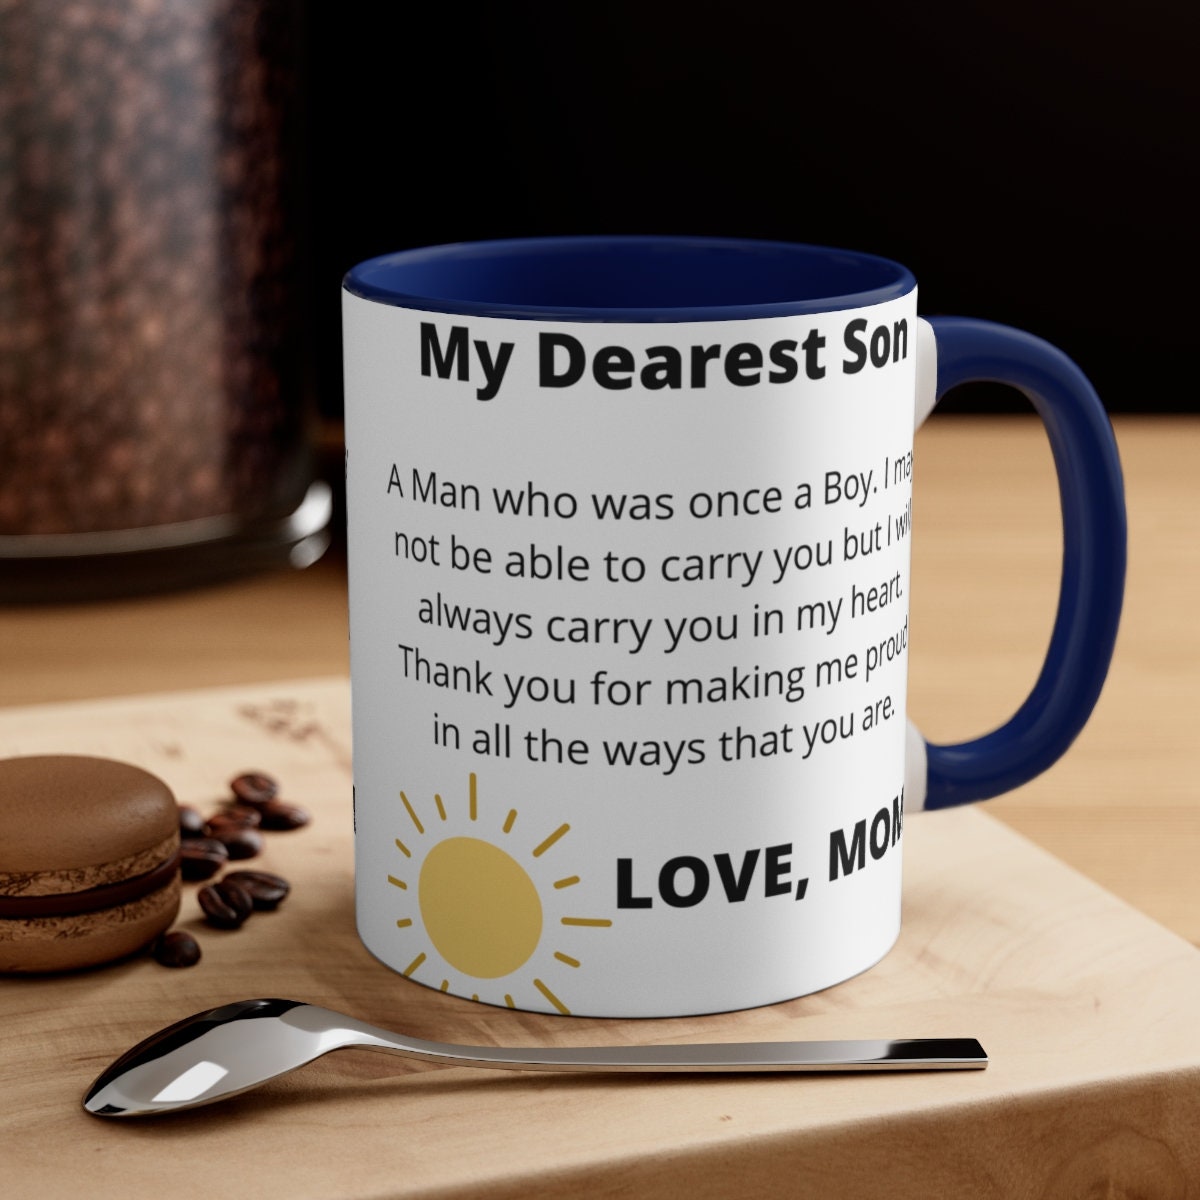 Birthday Gifts For Mom From Son | Unique birthday gifts, Best birthday gifts,  Mom birthday gift